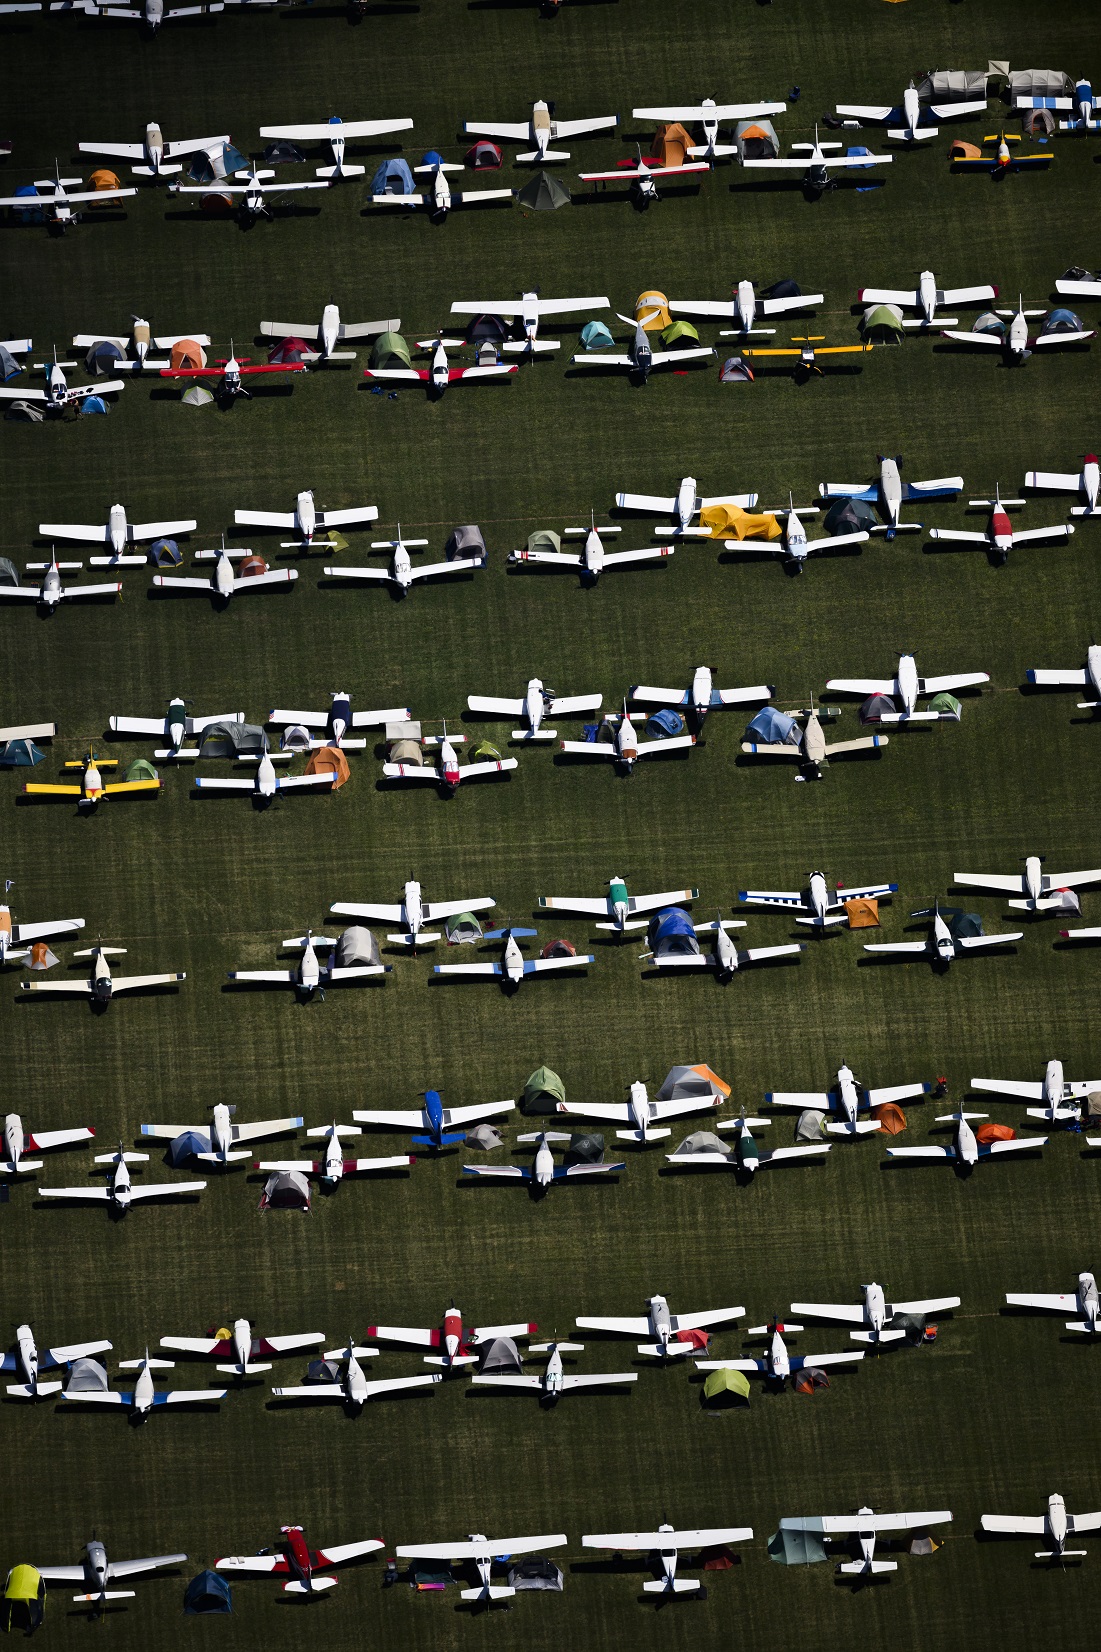 Thousands of aviators camp next to their airplanes during EAA AirVenture Oshkosh. (EAA/Camden Thrasher)